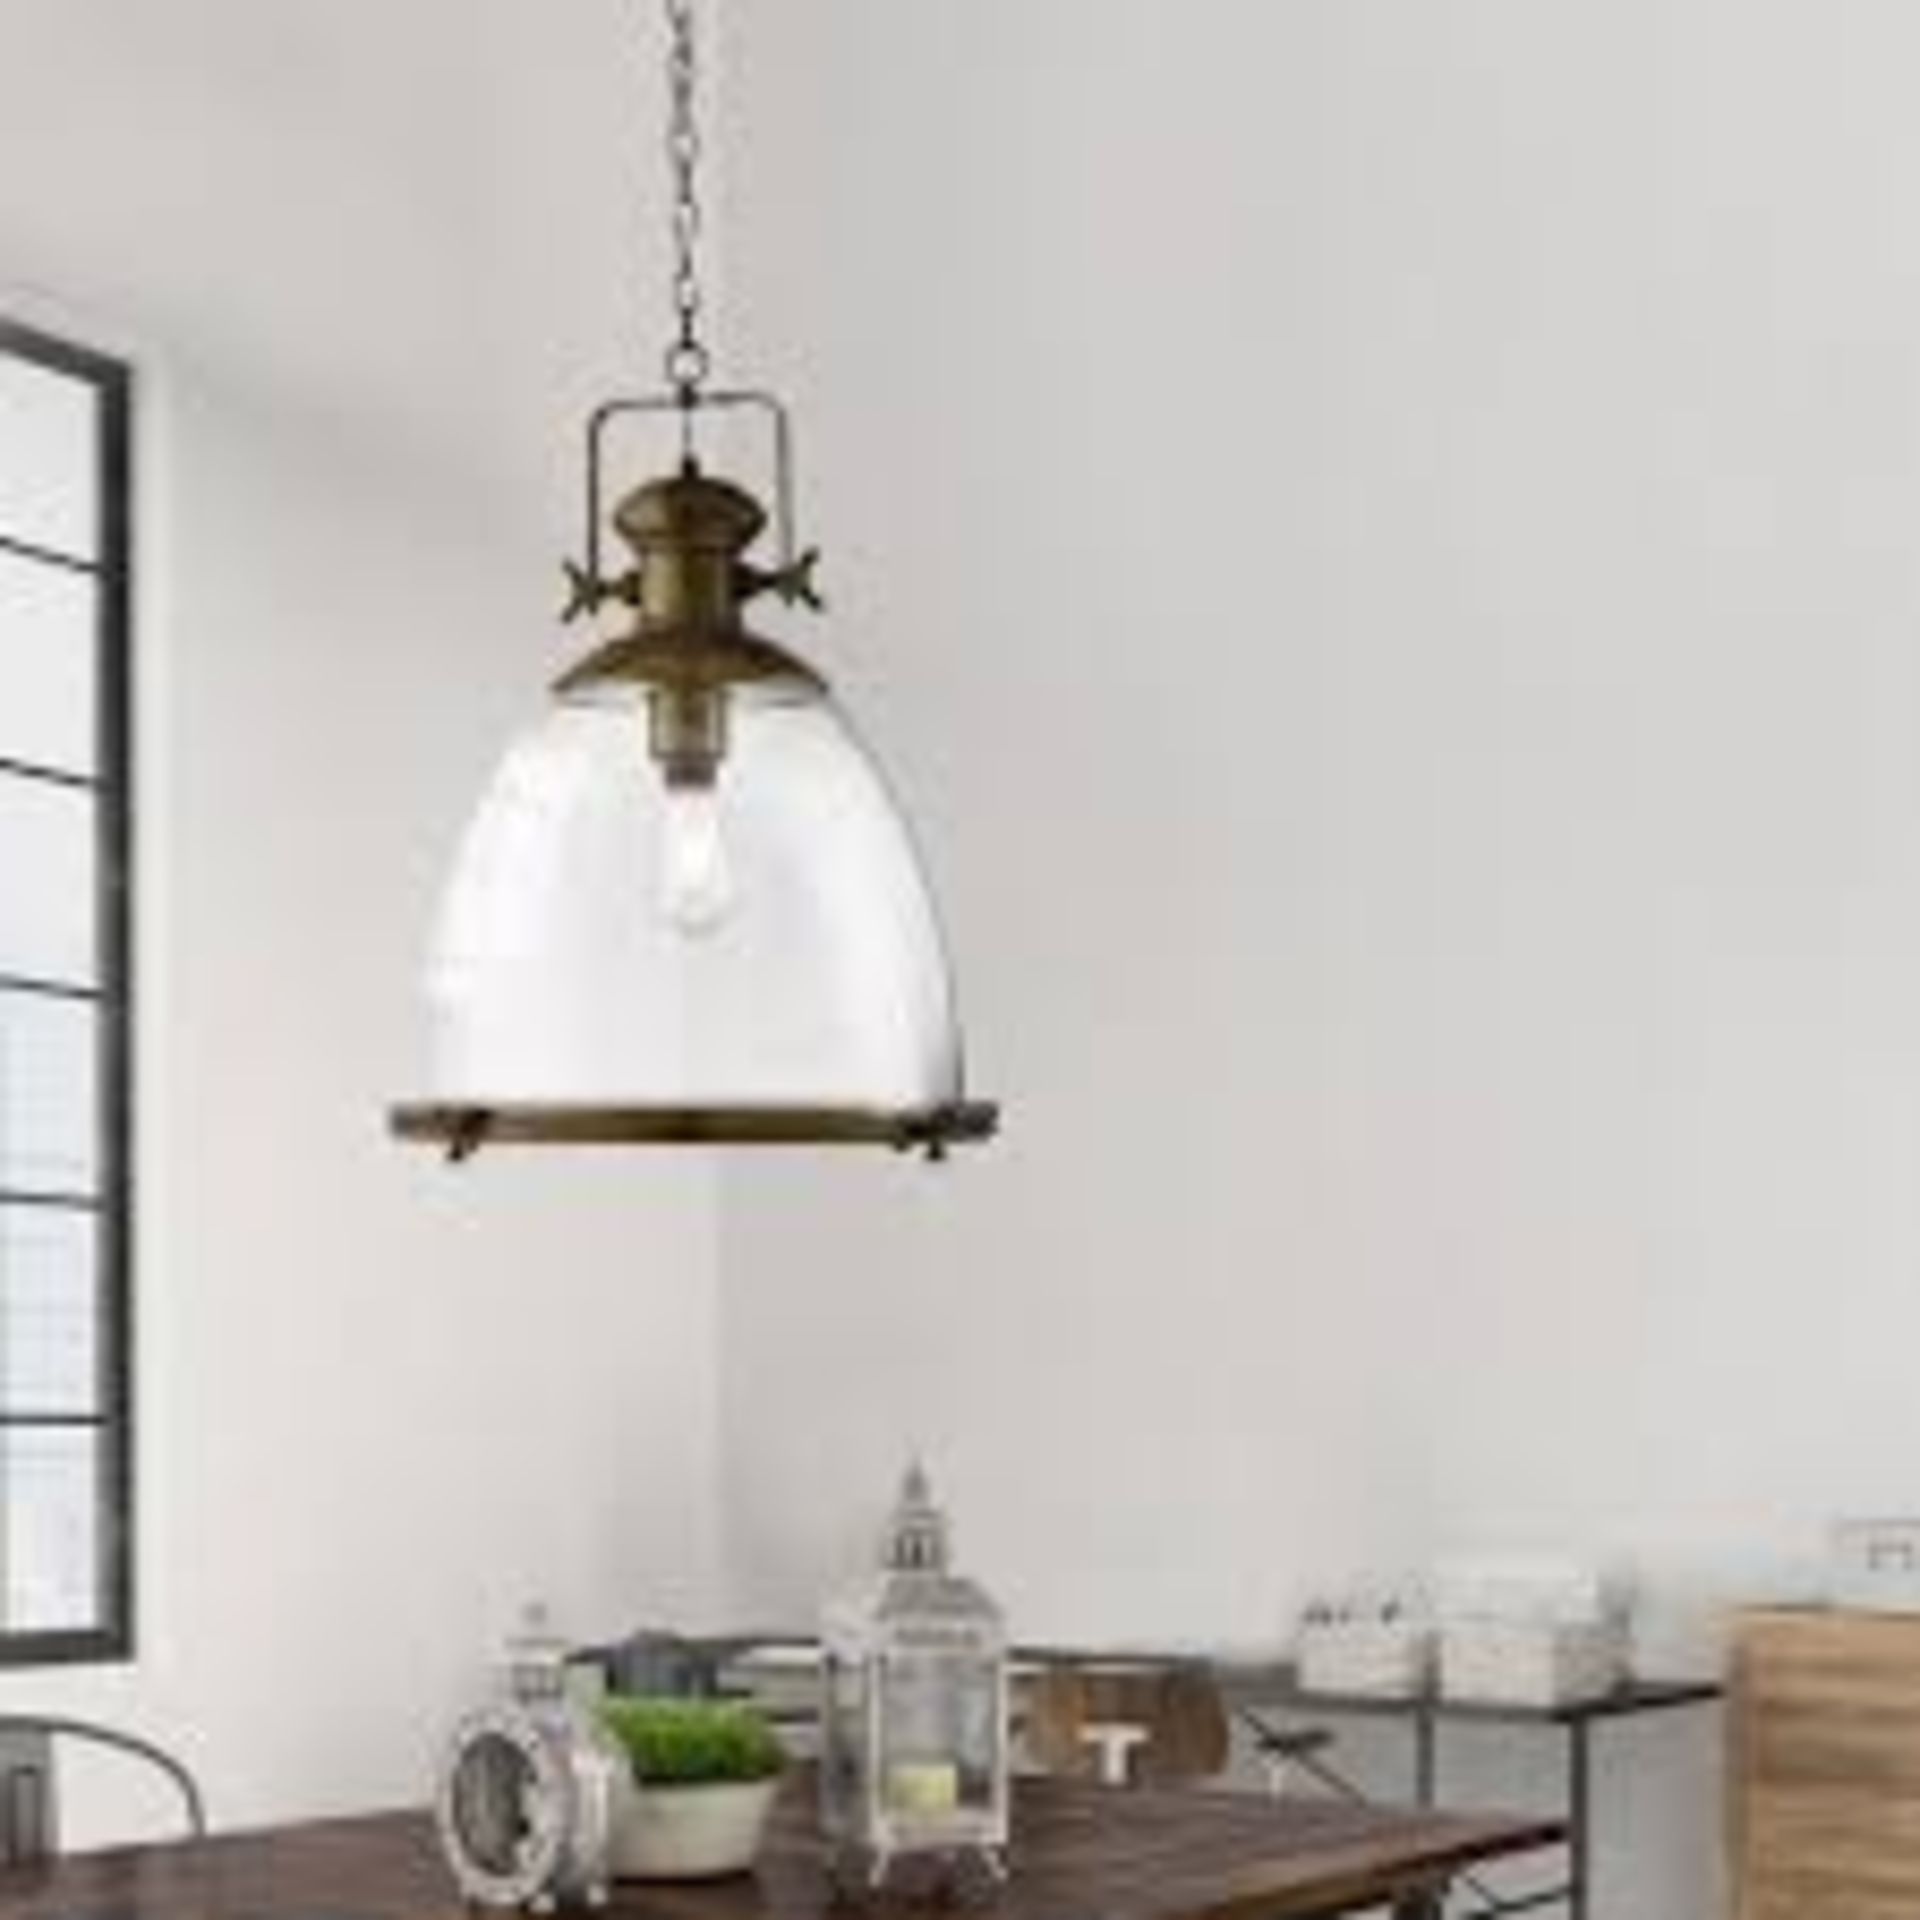 1 x Searchlight Large Industrial Pendant in Antique Brass - Ref: 6659 - New and Boxed - RRP: £550 - Image 4 of 4